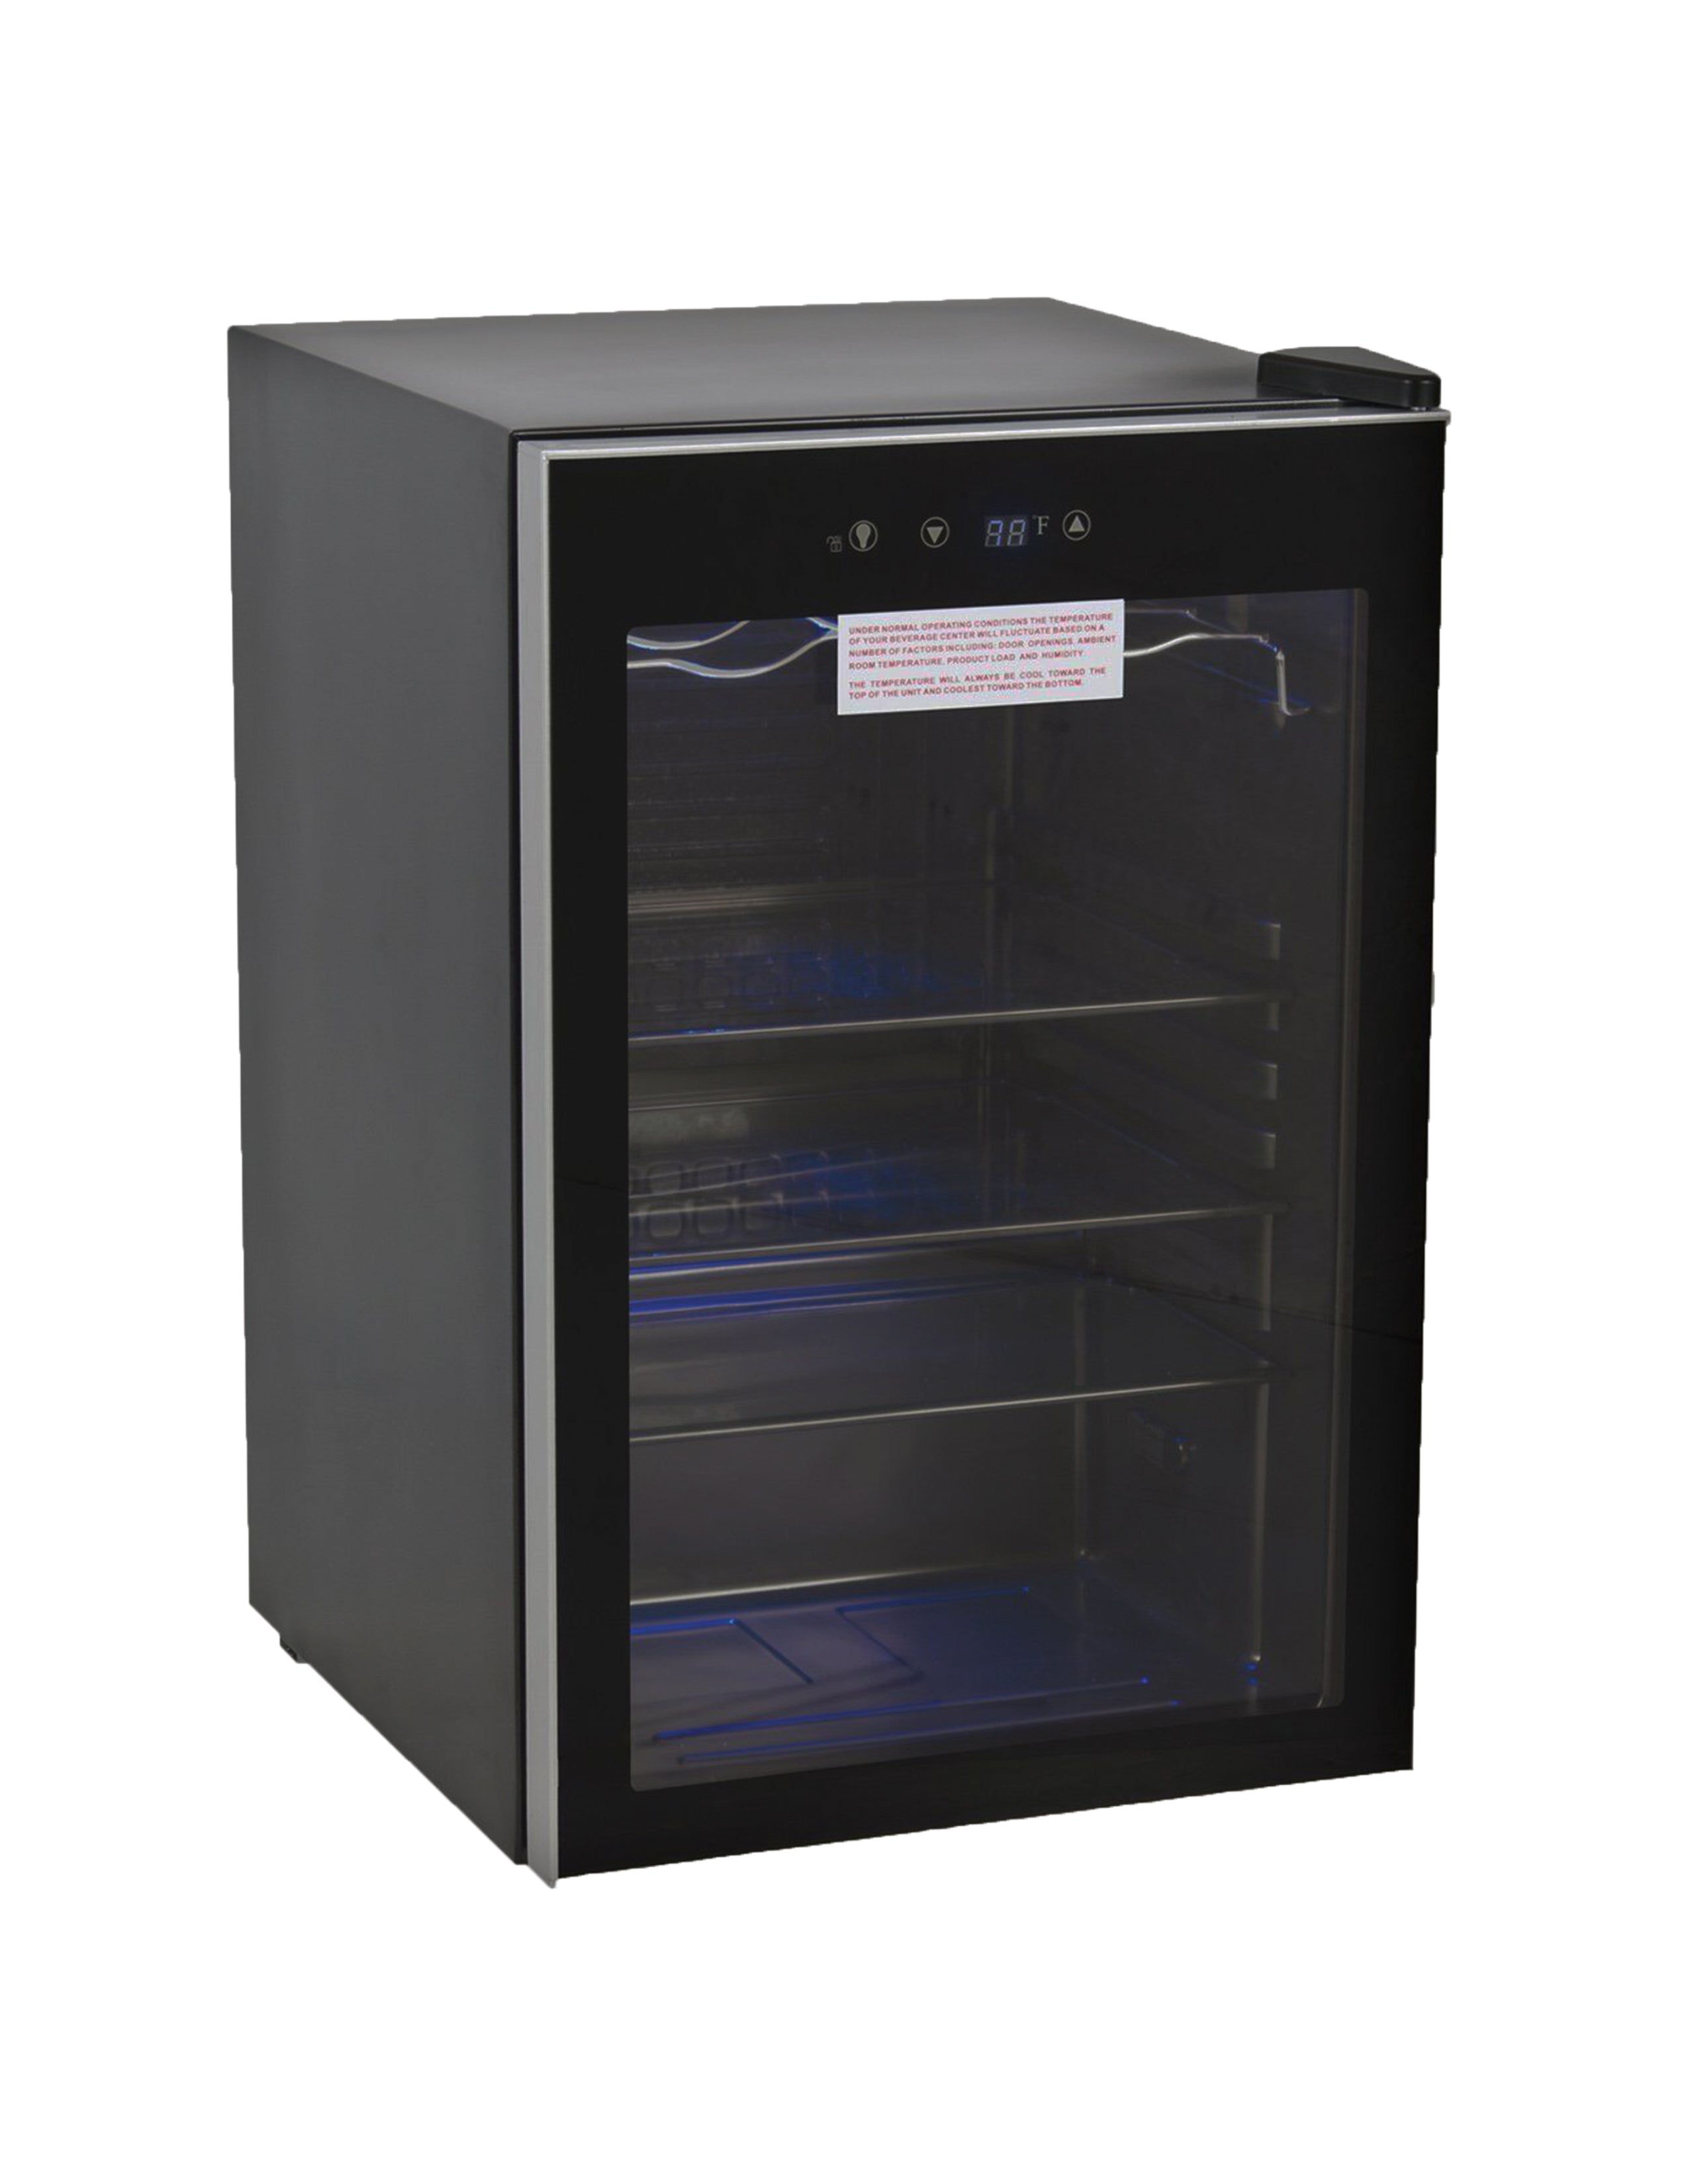 RMF-BC-128SS/ BEVERAGE AND WINE COOLER